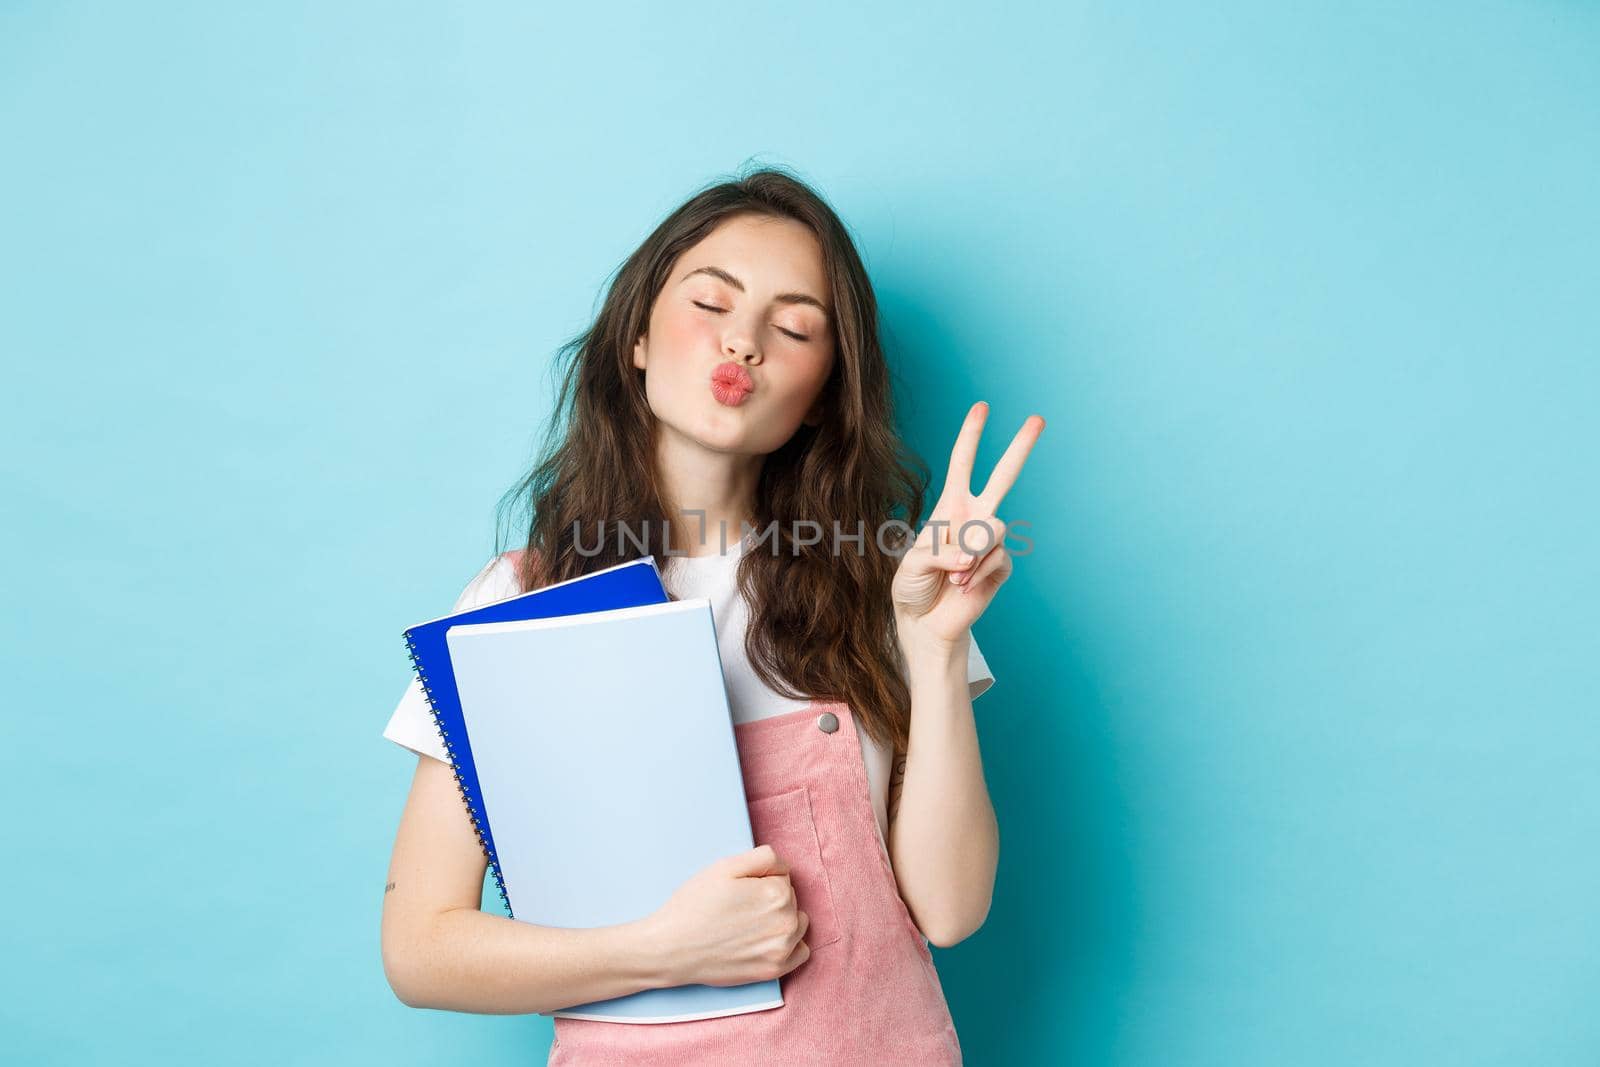 Education concept. Smiling glamour girl pucker lips for kiss, showing v-sign peace and holding notebooks for study, standing against blue background.